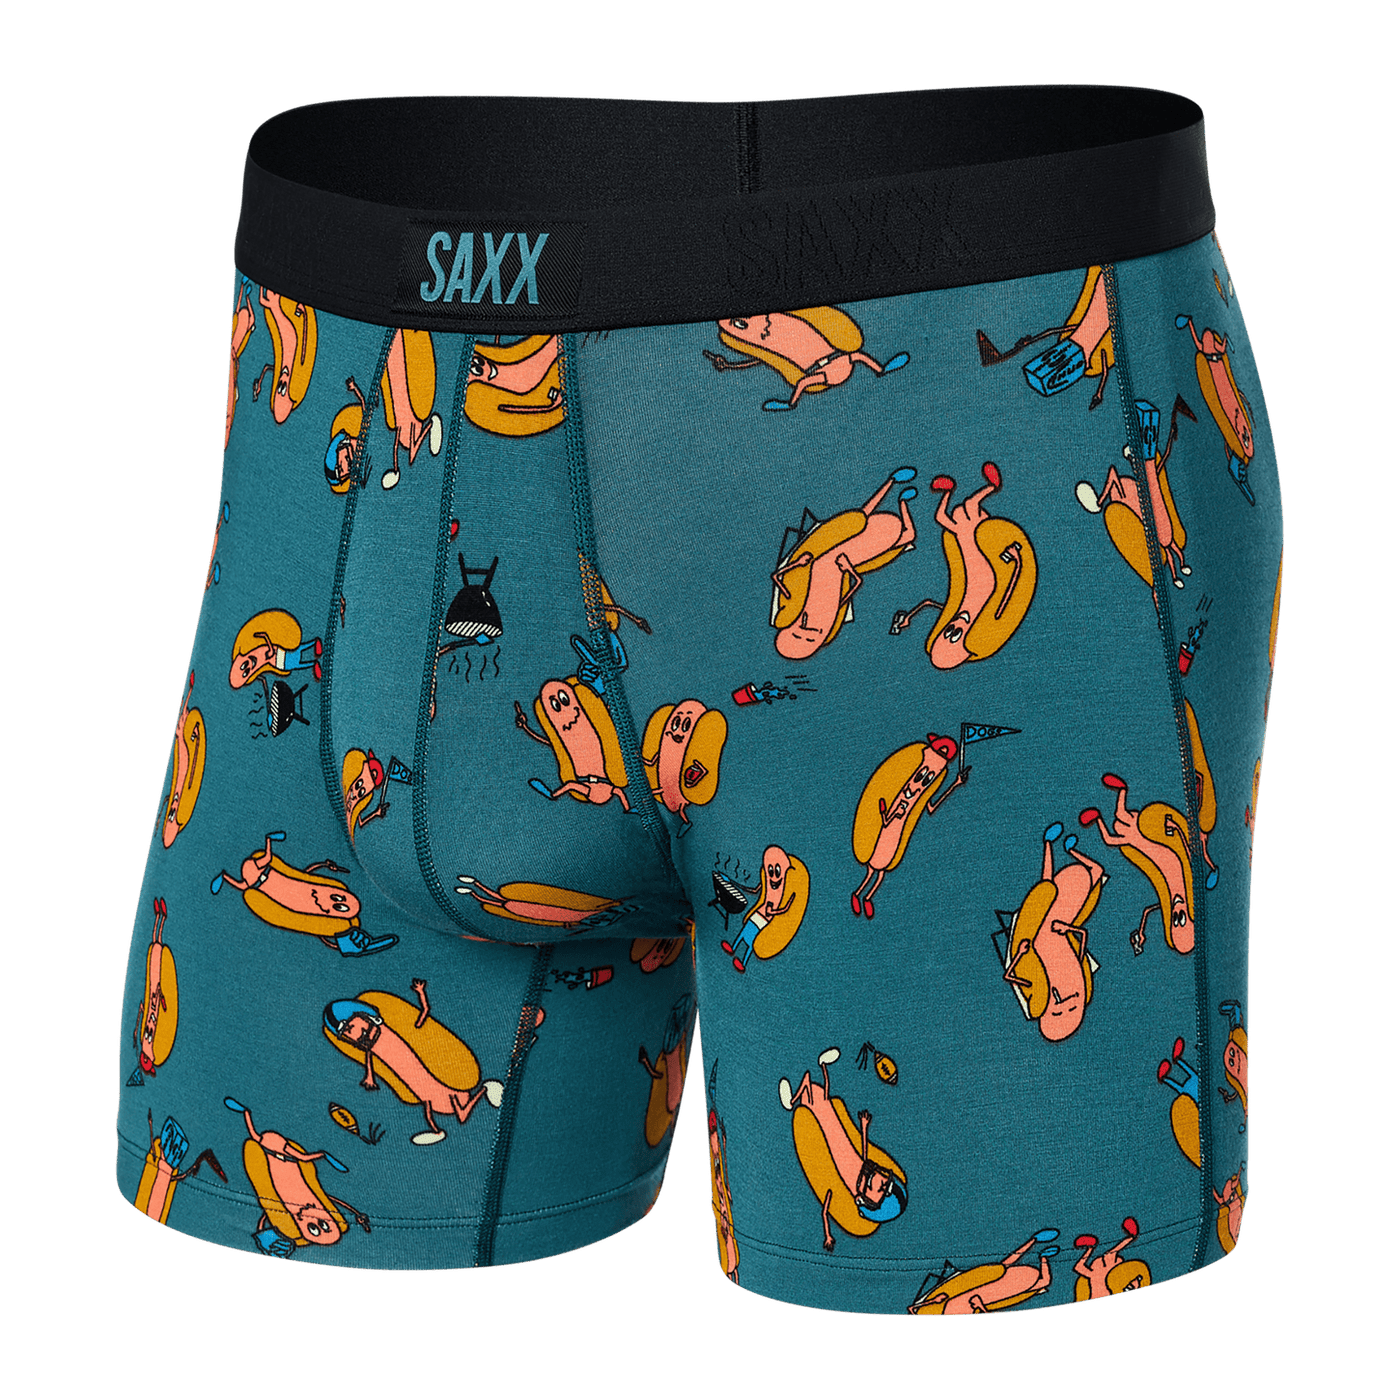 Saxx Vibe Boxers - Tailgaters-Teal - The Hockey Shop Source For Sports